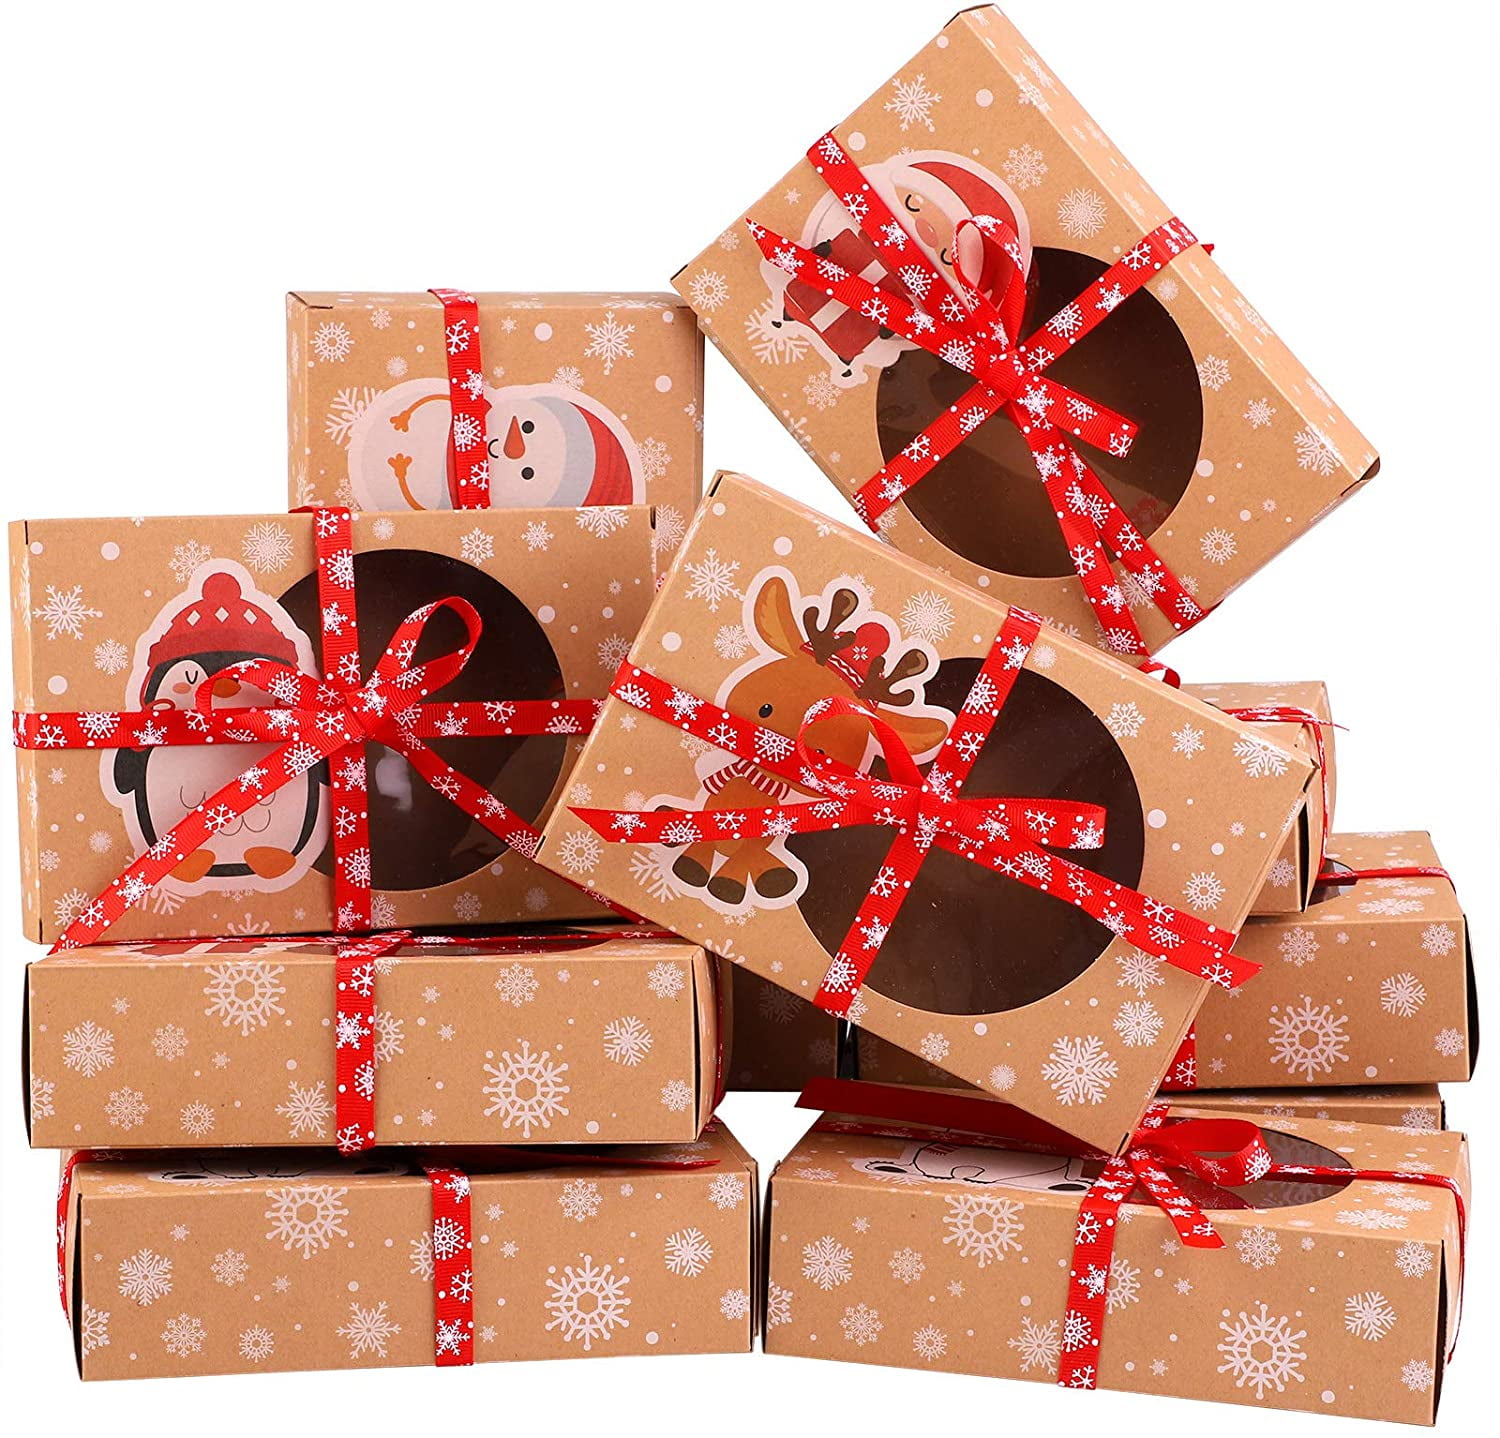 12 Sheets Oil Absorbing Tissues and 12 Rolls Red Ribbons for Christmas Party Favors 12 Pieces Large Christmas Candy Cookie Boxes Kraft Paper Treat Boxes with Clear Window 